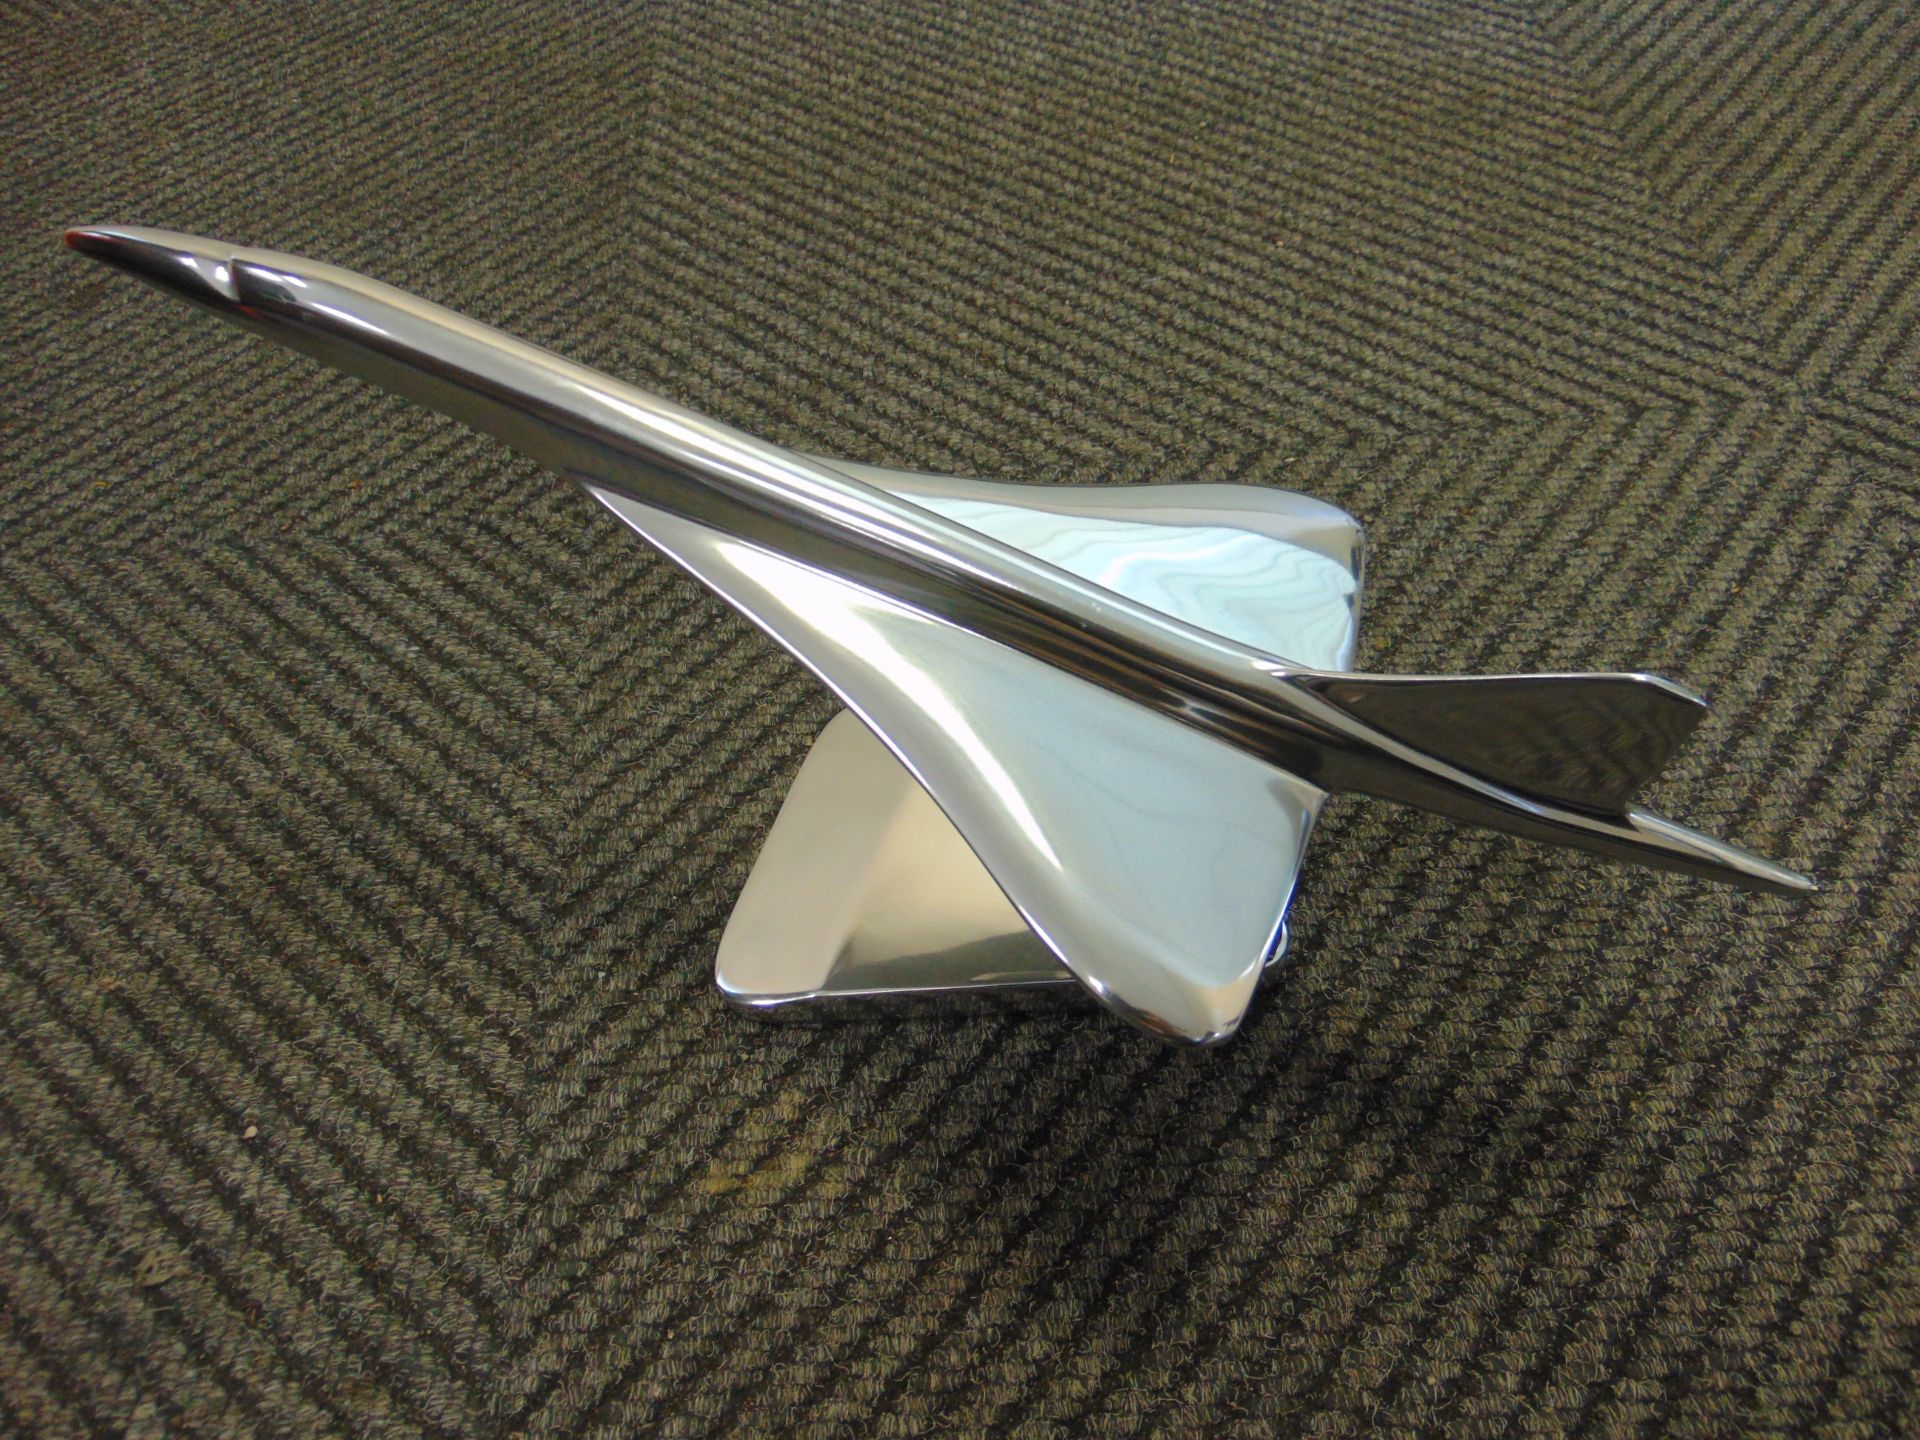 STUNNING POLISHED ALLUMINUM DESK TOP MODEL OF A CONCORD IN FLIGHT ON STAND - Image 10 of 12